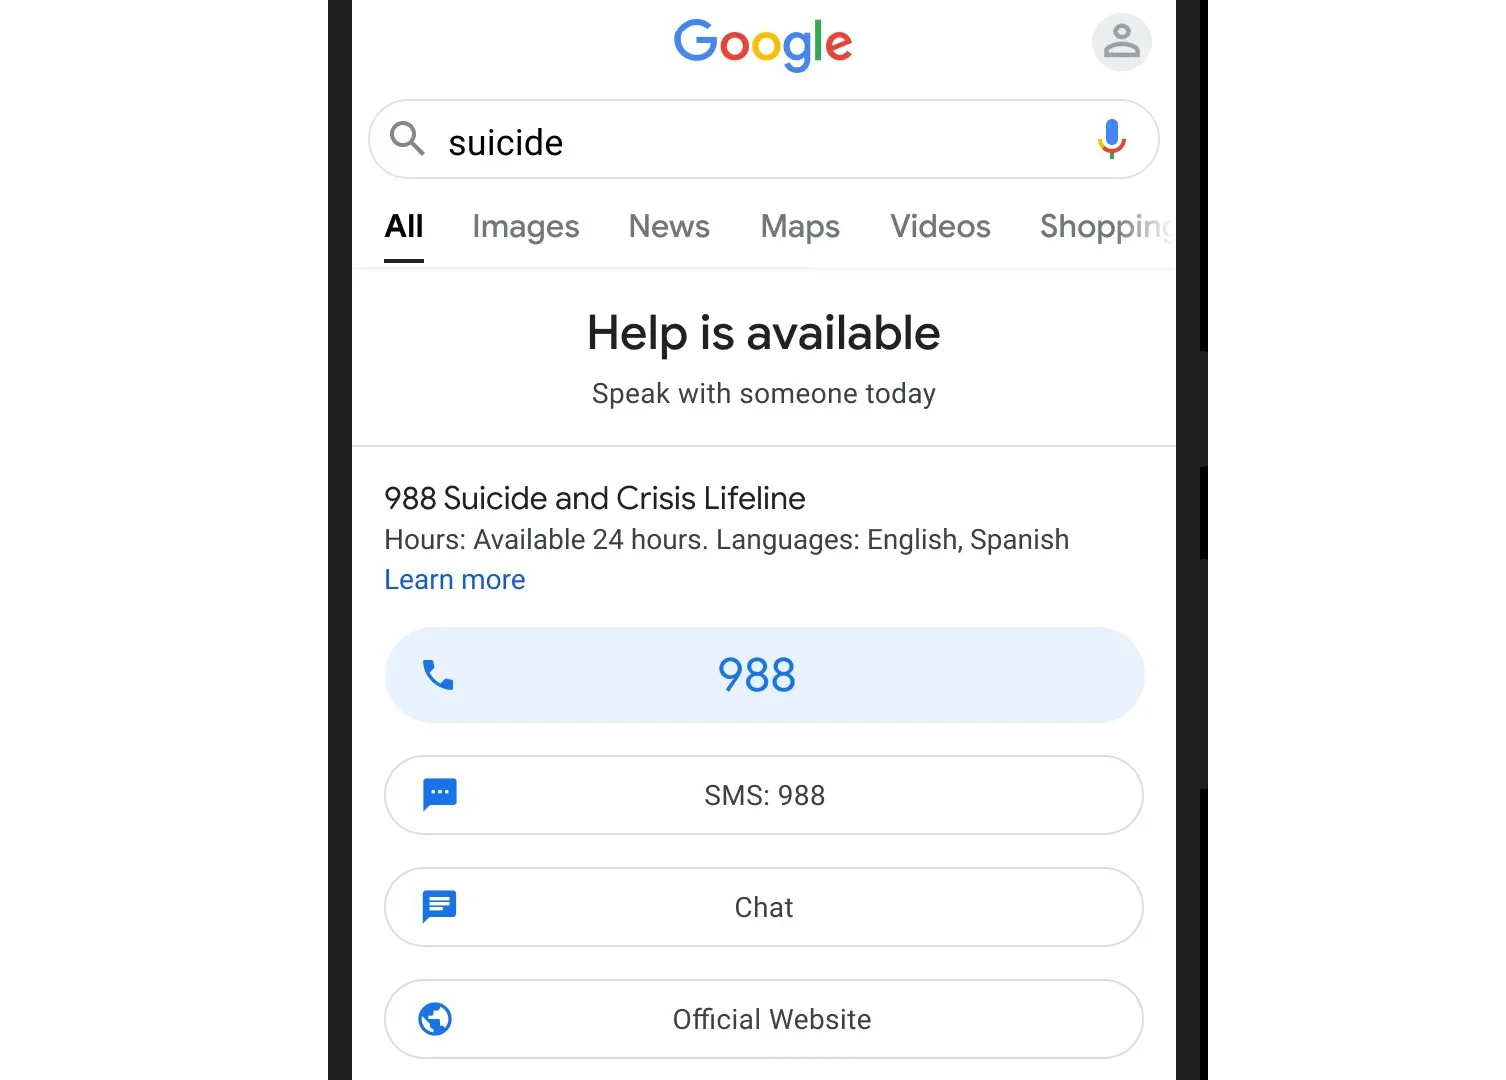 Google search page displaying Suicide and Crisis Lifeline results for the query 